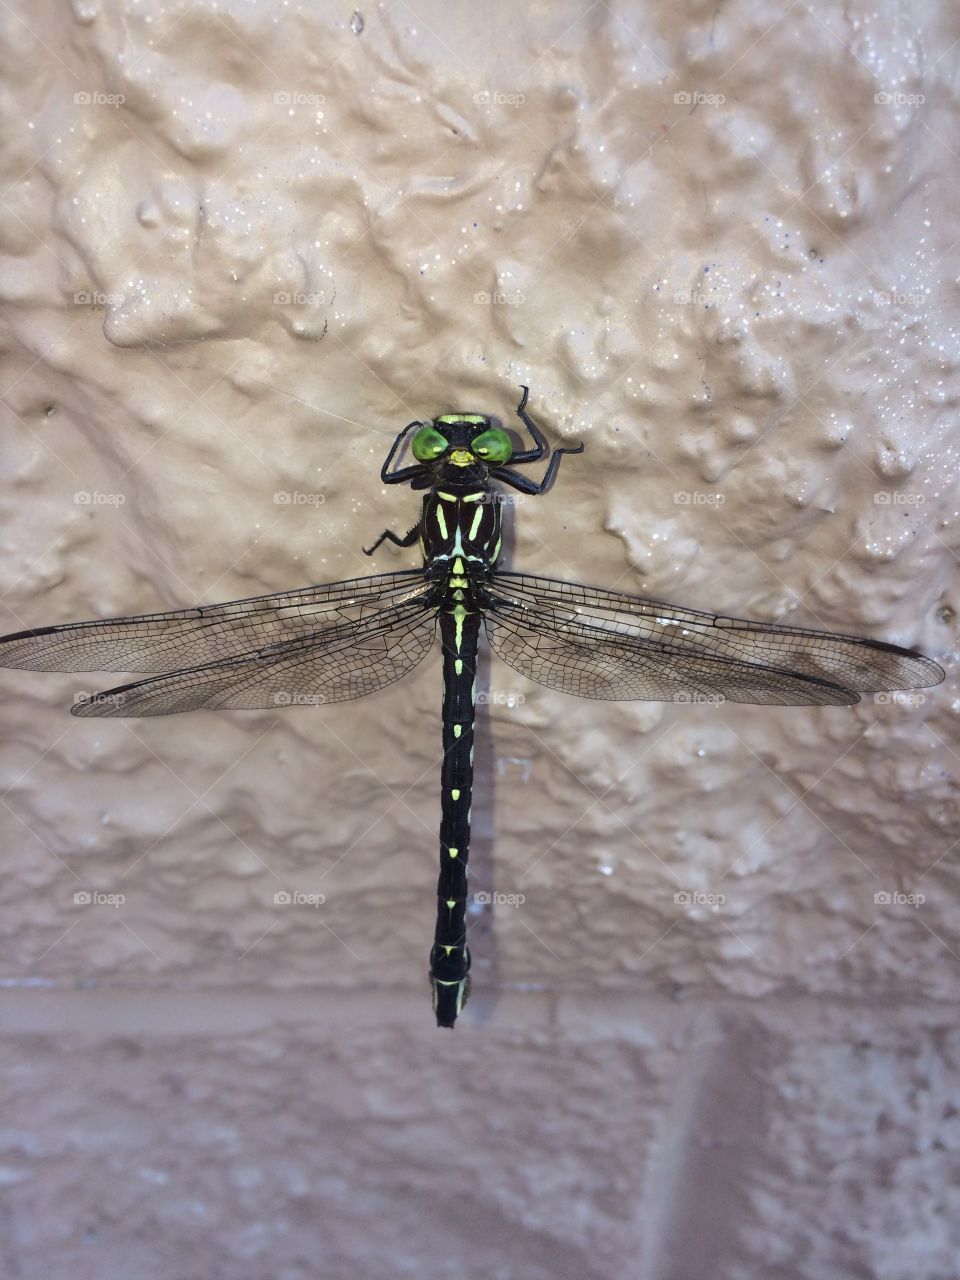 Dragon Fly. Dragon Fly on the wall